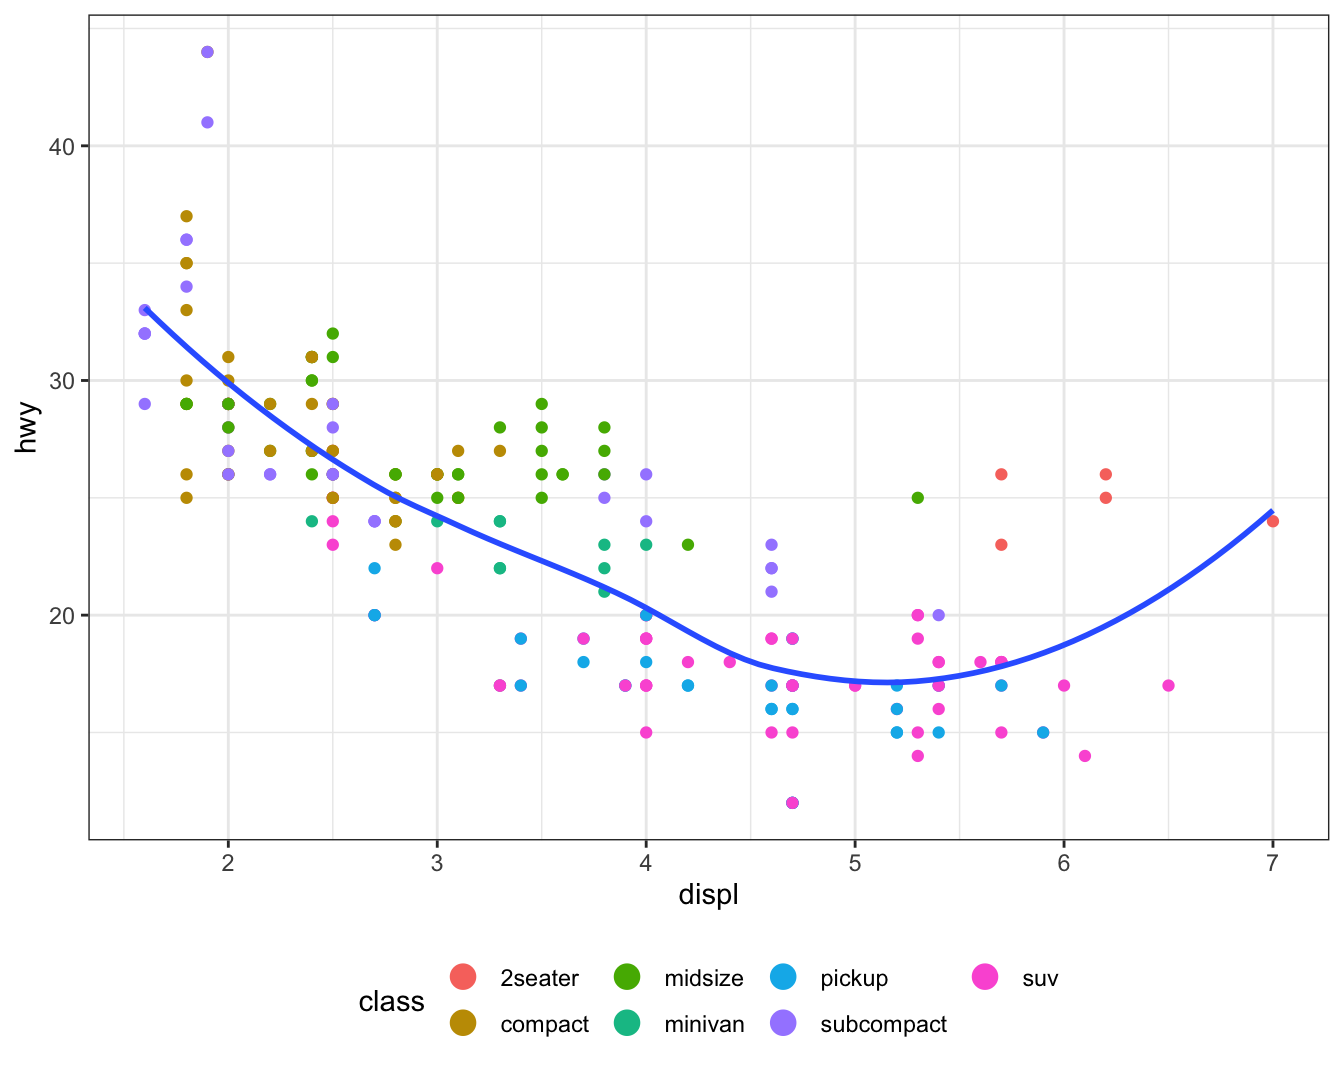 Scatterplot of highway fuel efficiency versus engine size of cars
where points are colored based on class of car. Overlaid on the plot is a
smooth curve. The legend is in the bottom and classes are listed
horizontally in two rows. The points in the legend are larger than the points
in the plot.